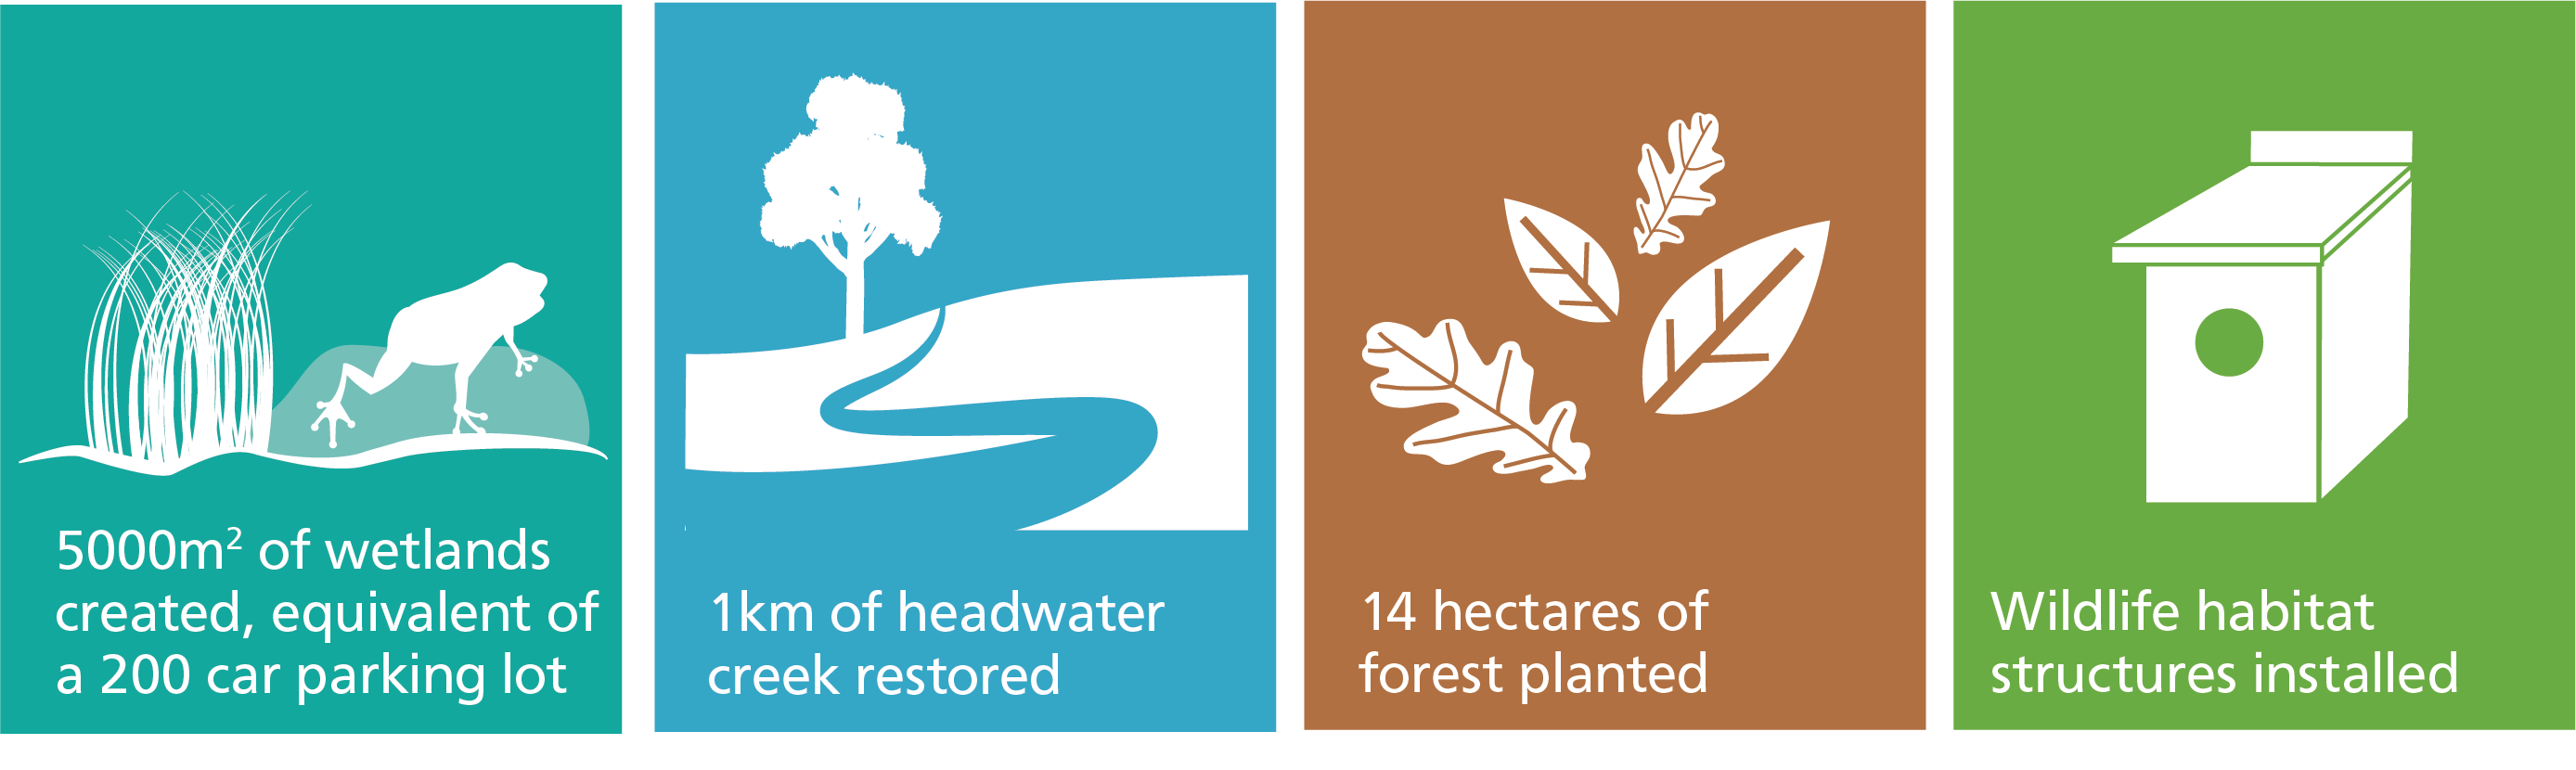 infographic detailing hopkins tract restoration project highlights